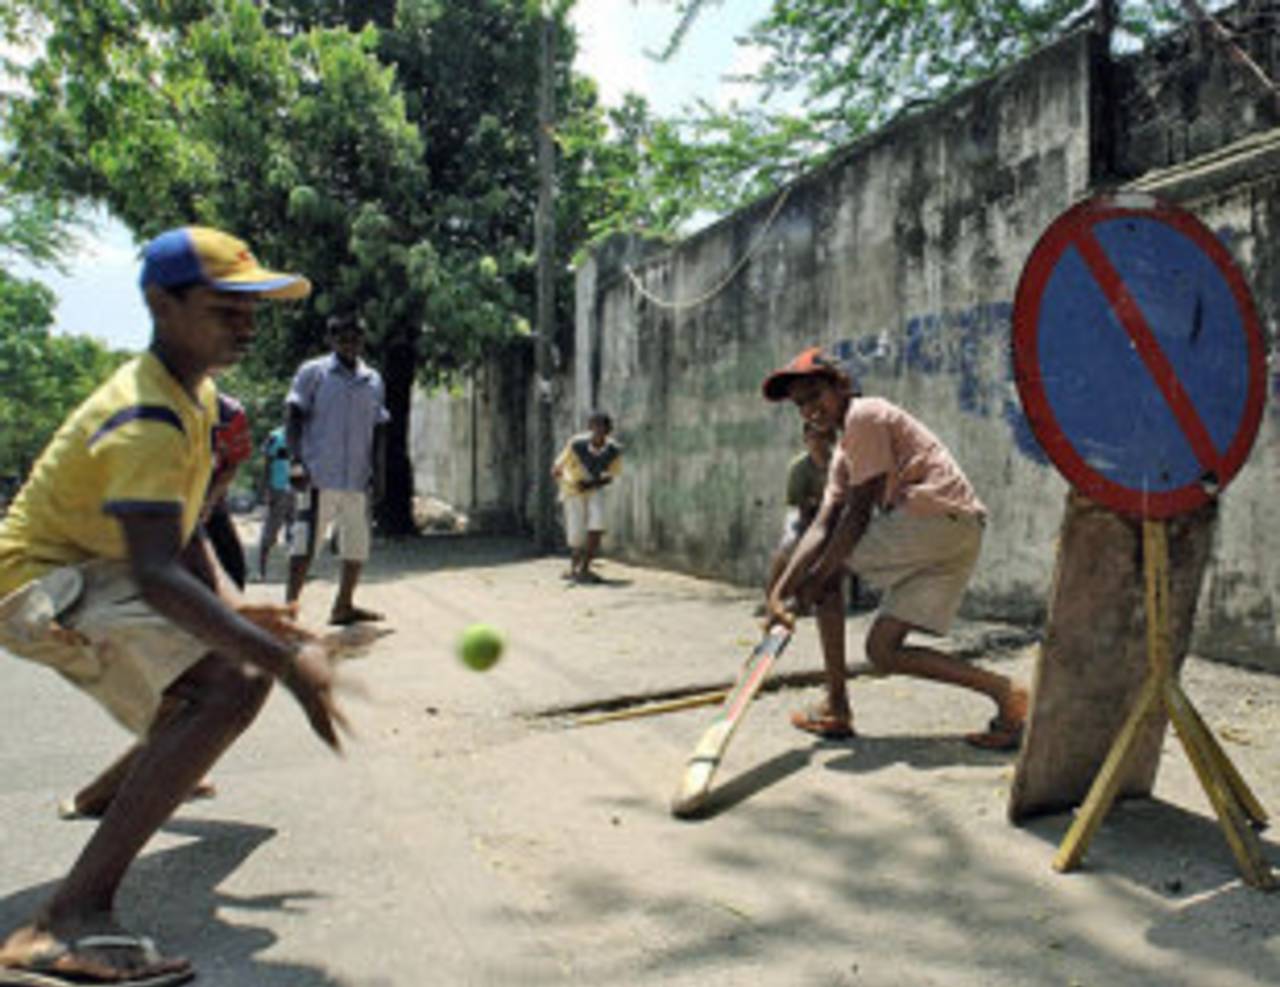 Children play on the streets, Colombo, April 20, 2007